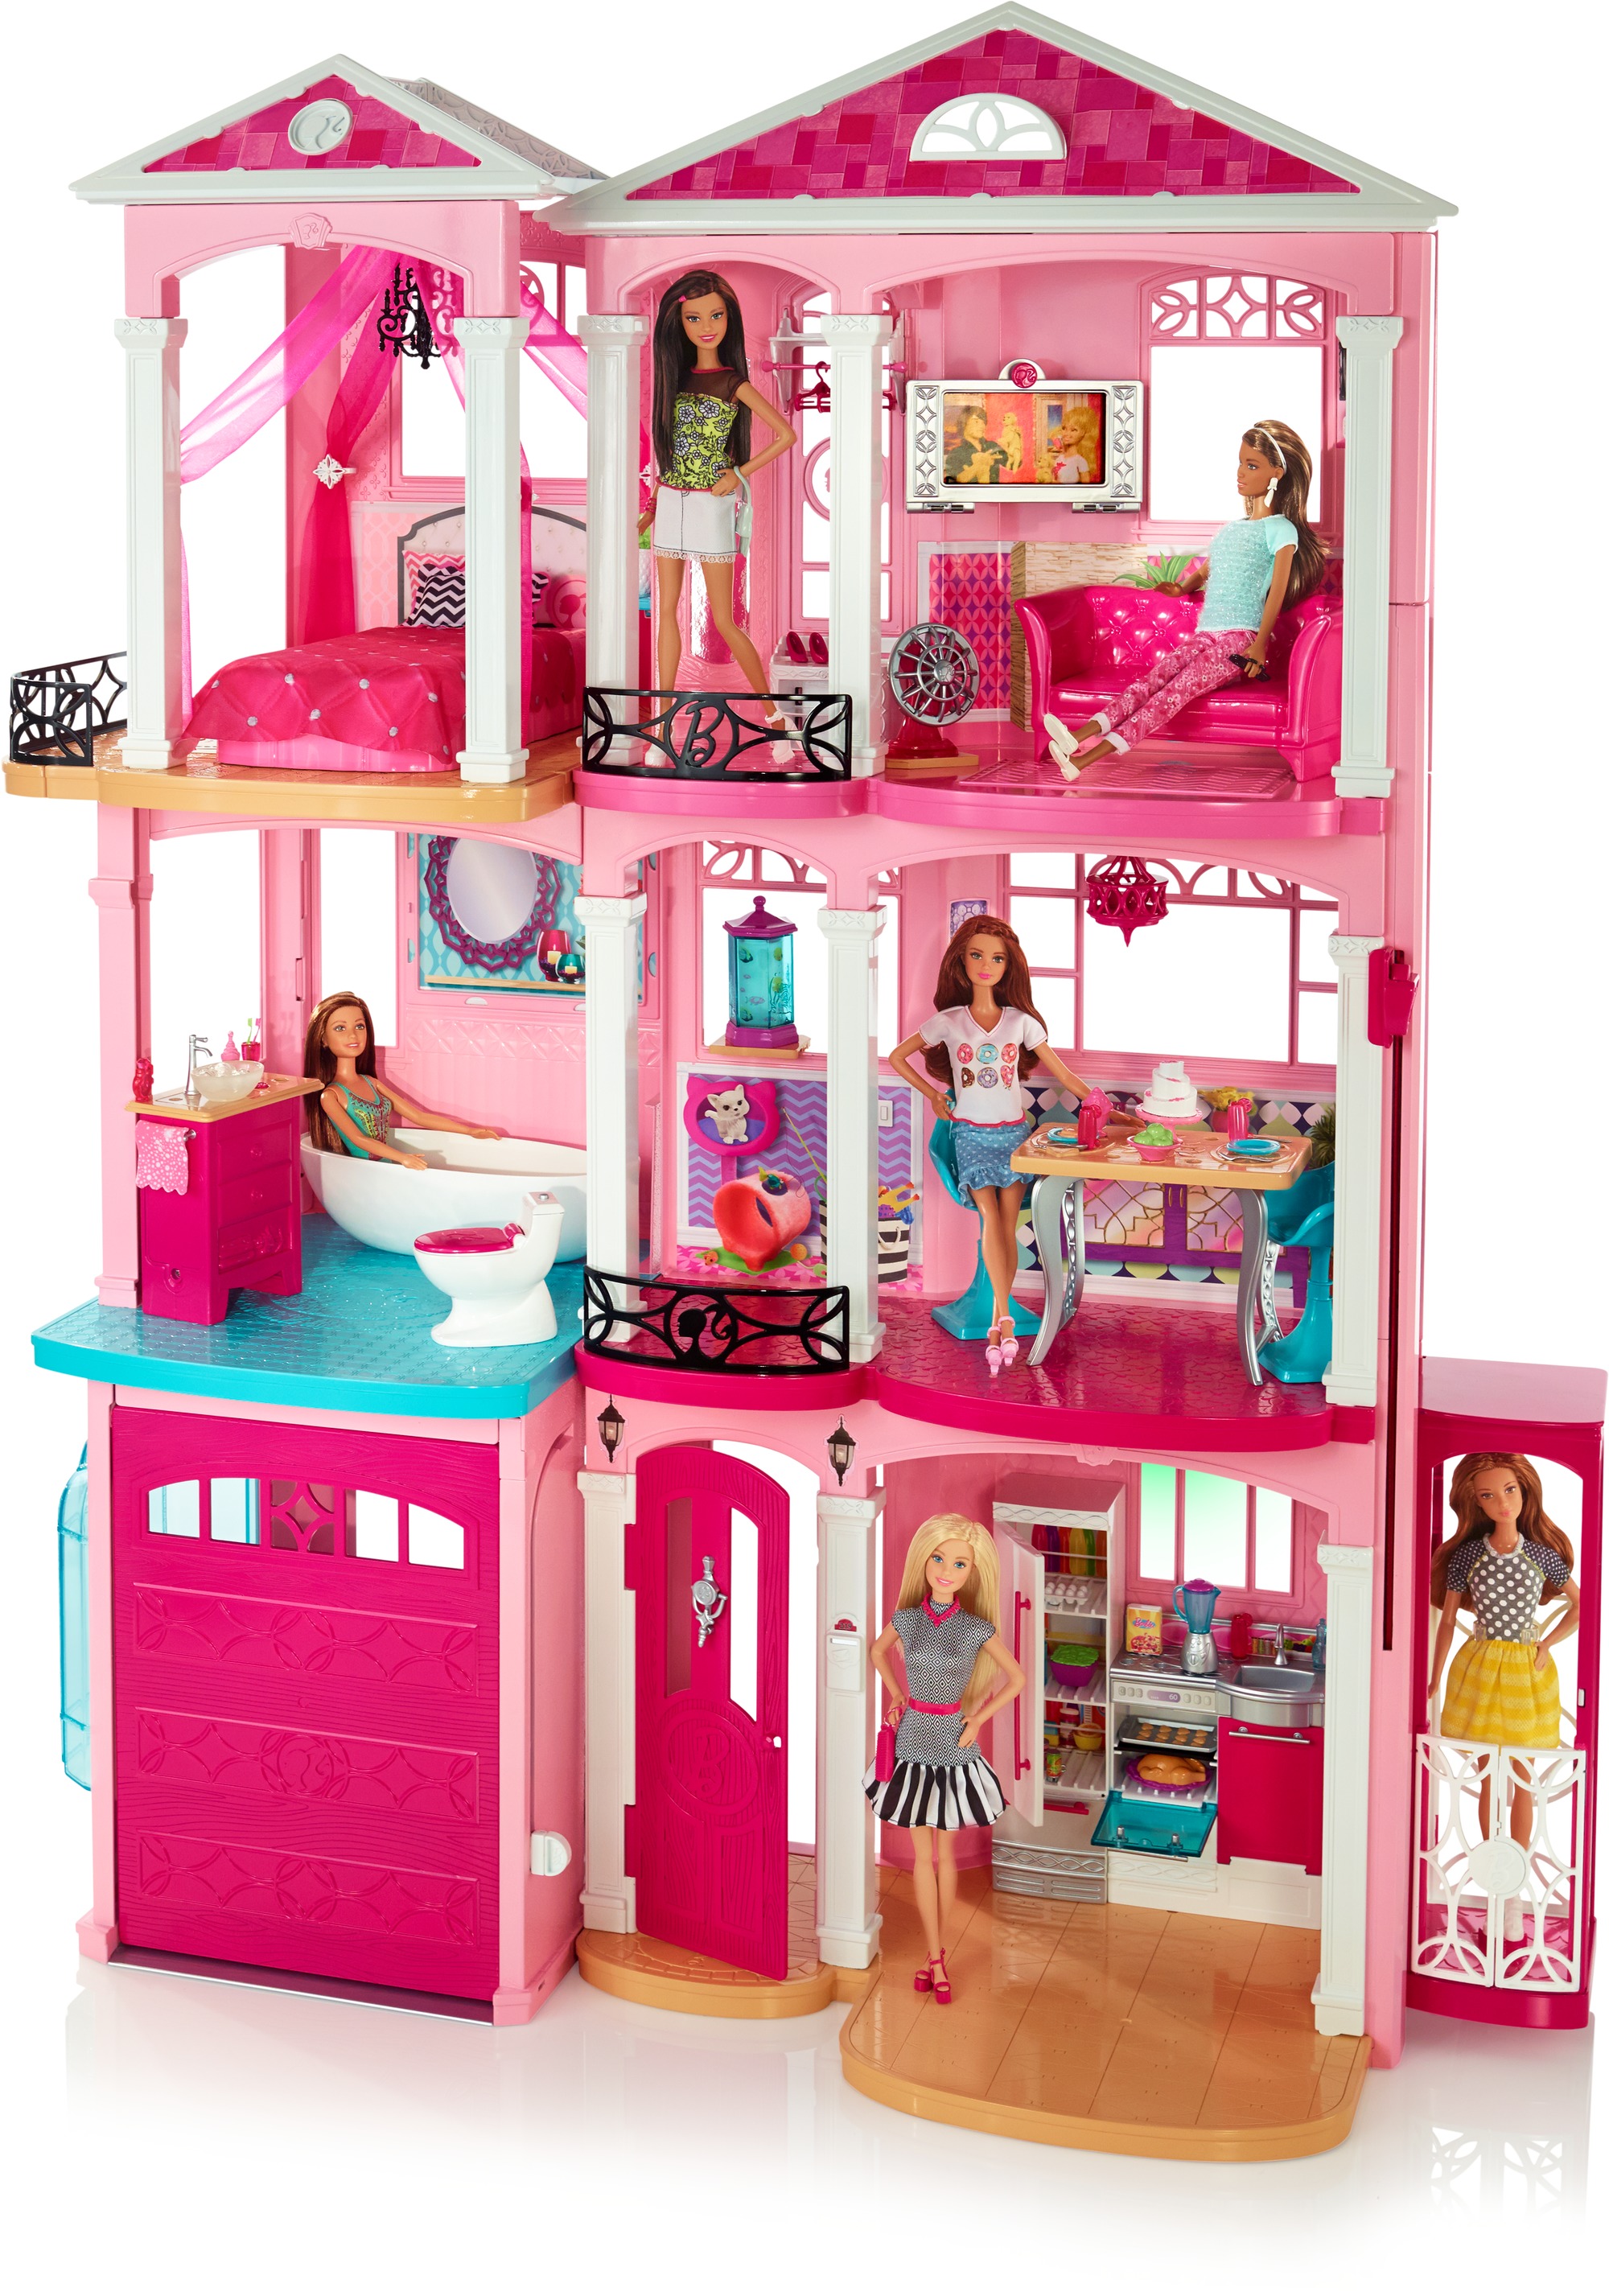 Barbie Estate DreamHouse Playset with 70+ Accessory Pieces - image 3 of 6